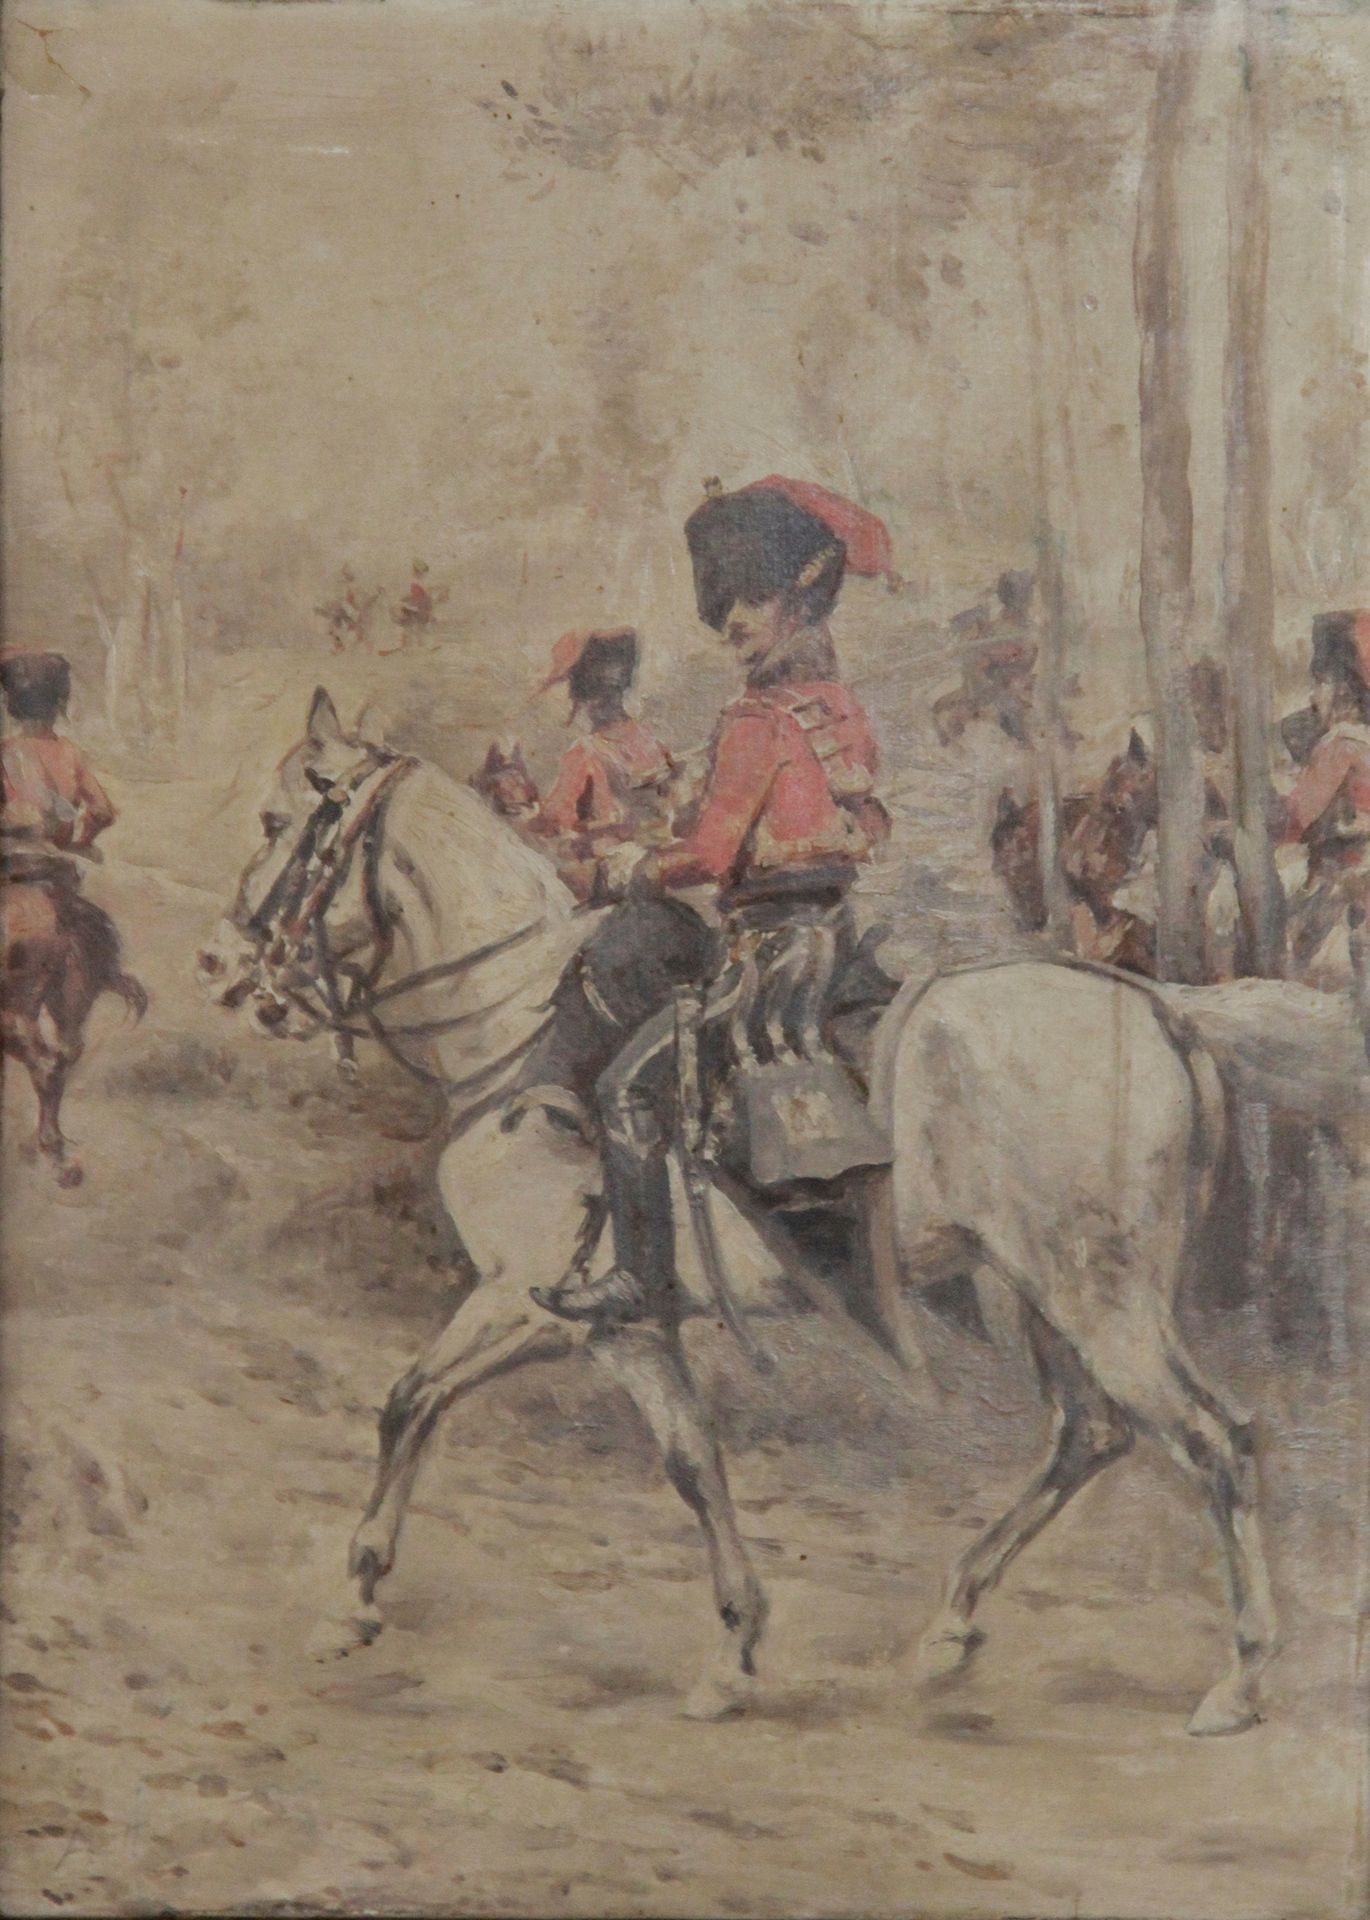 Null FRENCH PATIENT OF THE LATEST CENTURY

Platoon of hussars on horseback

Oil &hellip;